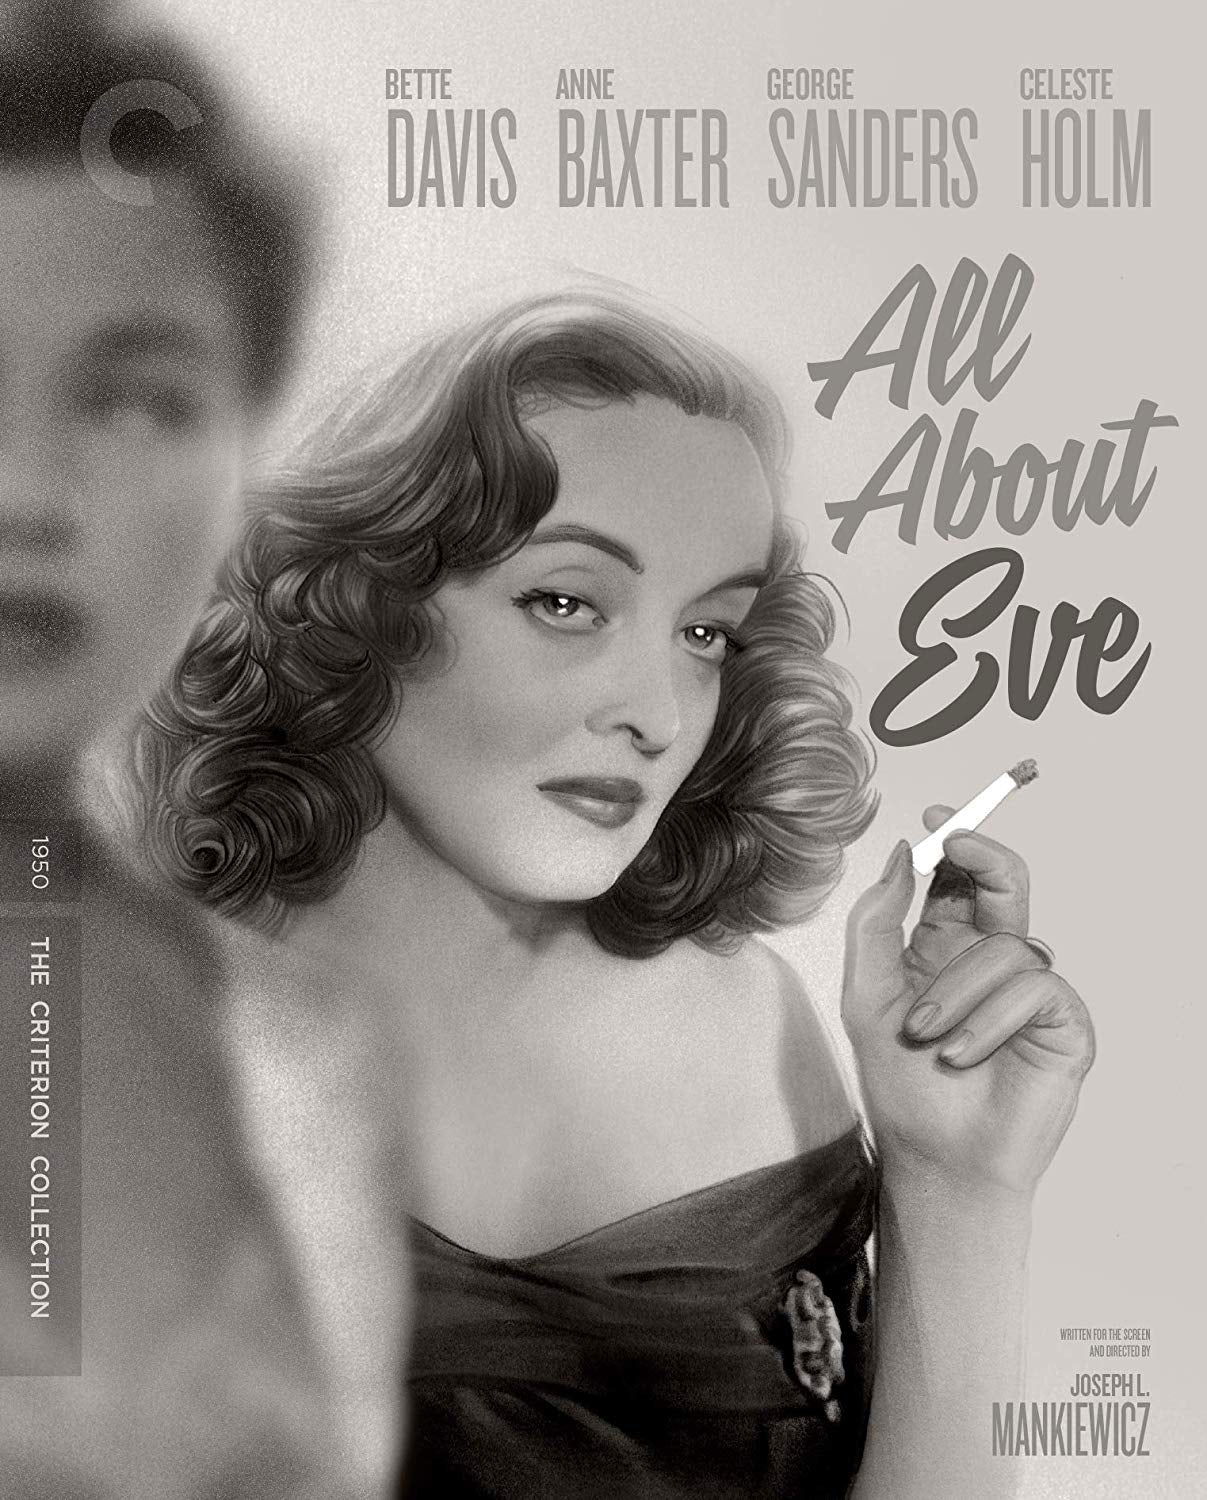 All About Eve [Criterion Collection] [Blu-ray] cover art